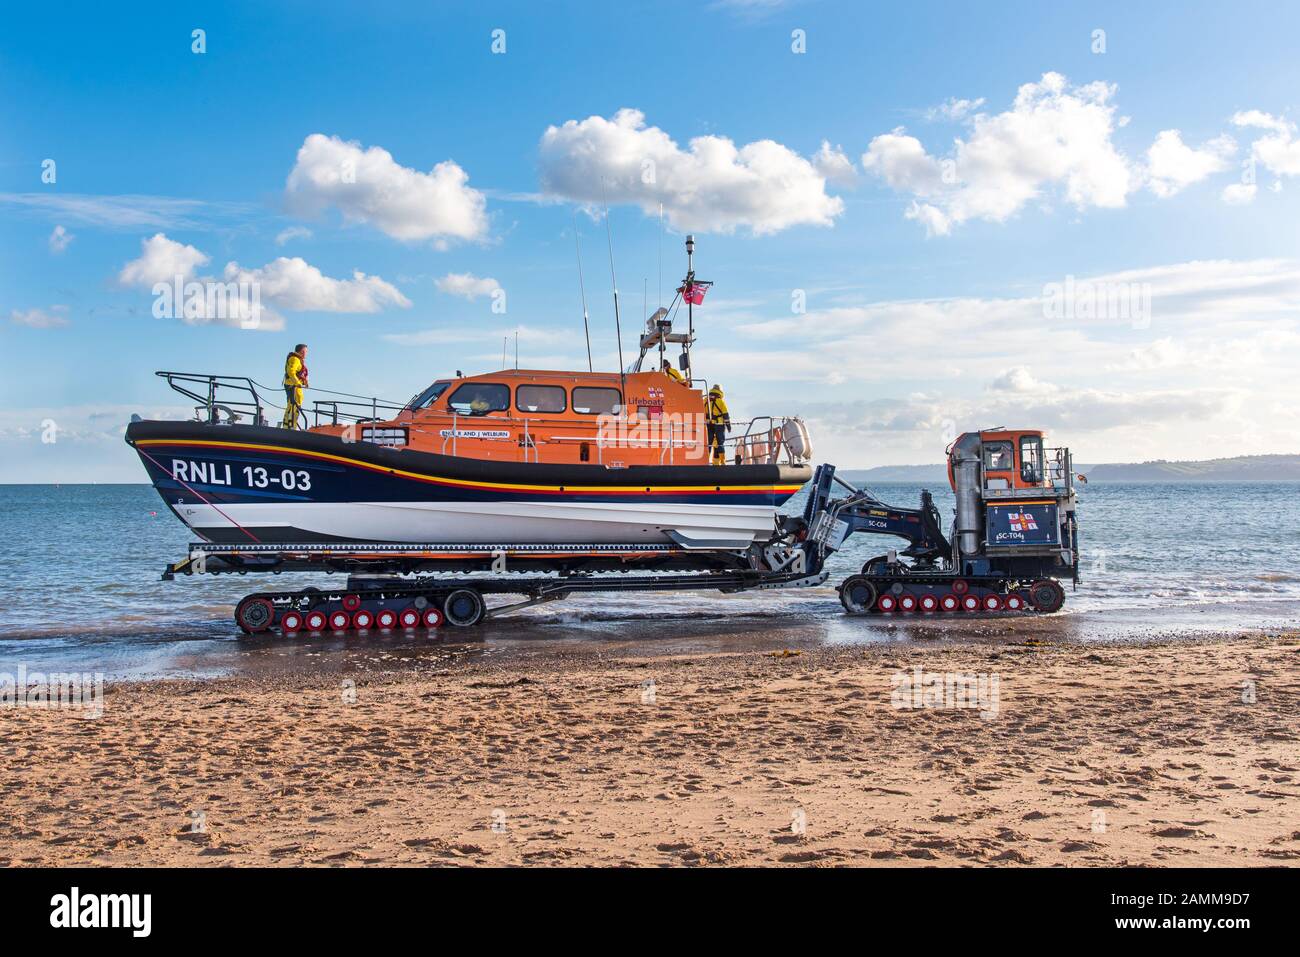 EXMOUTH, DEVON, UK - 3APR2019: RNLB R & J Welburn, a Shannon Class lifeboat, towed by tractor along the beach to a launch position during a regular ex Stock Photo